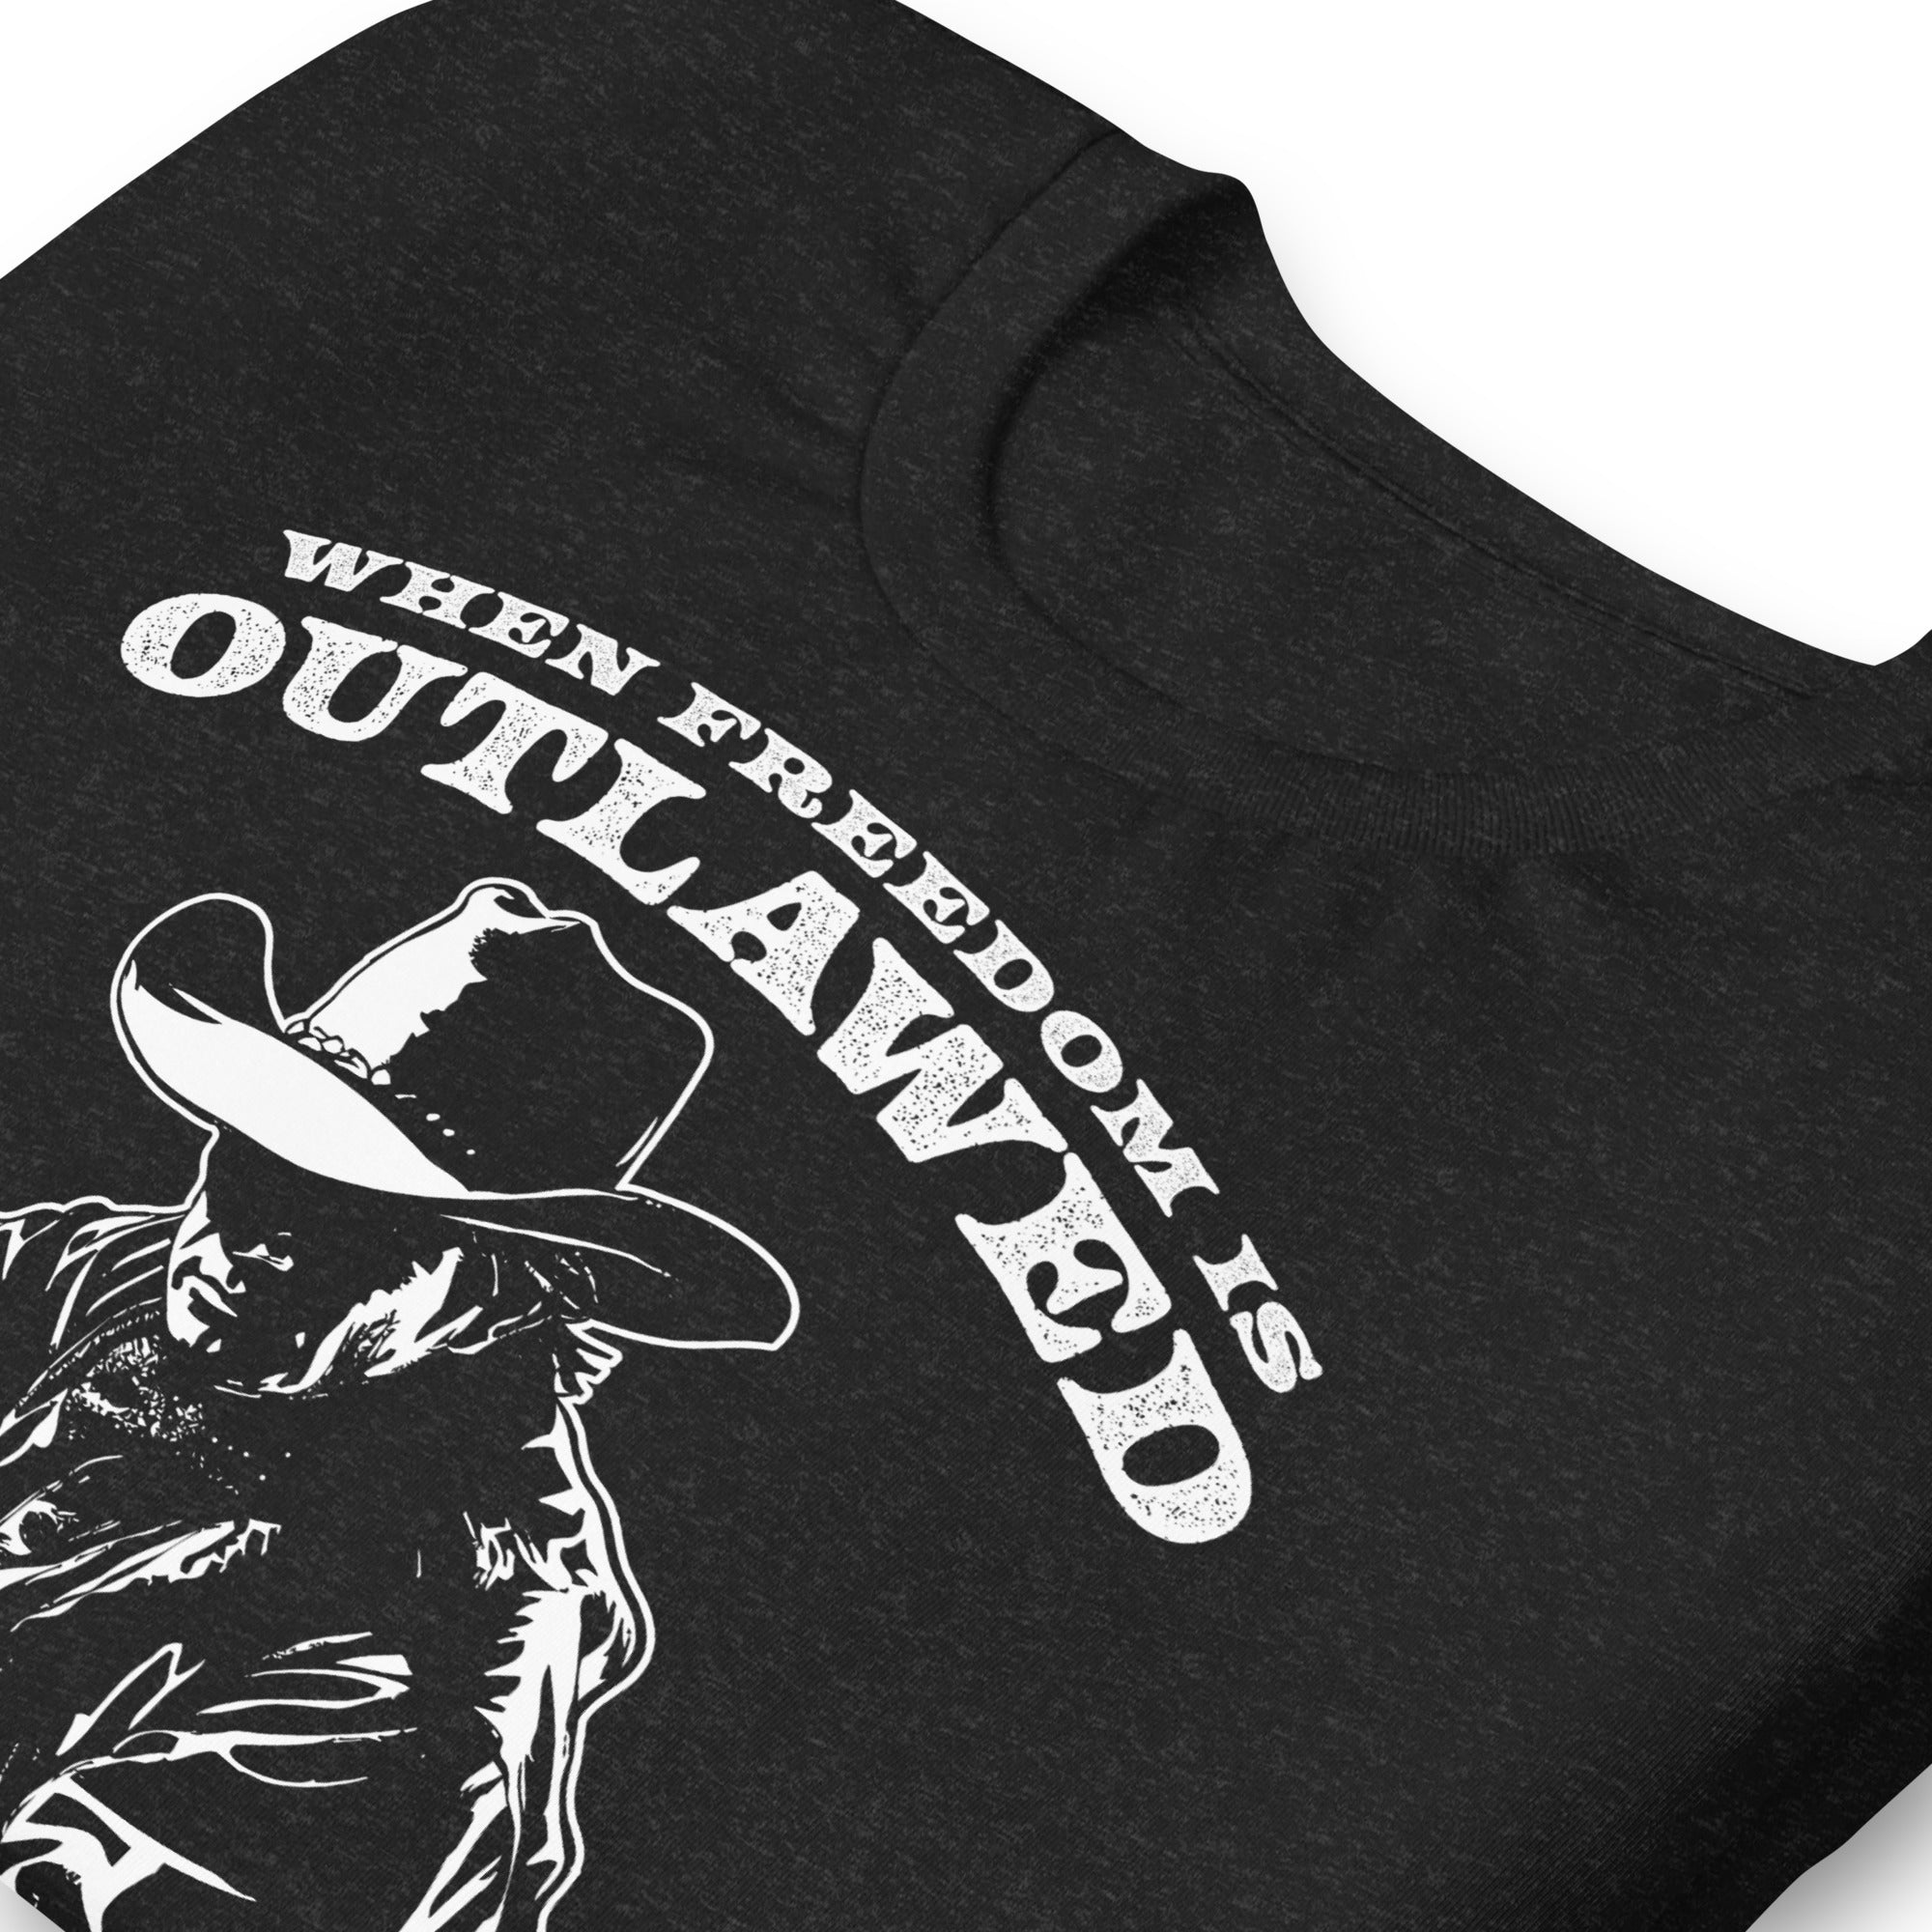 When Freedom is Outlawed Only Outlaws Will Be Free T-Shirt